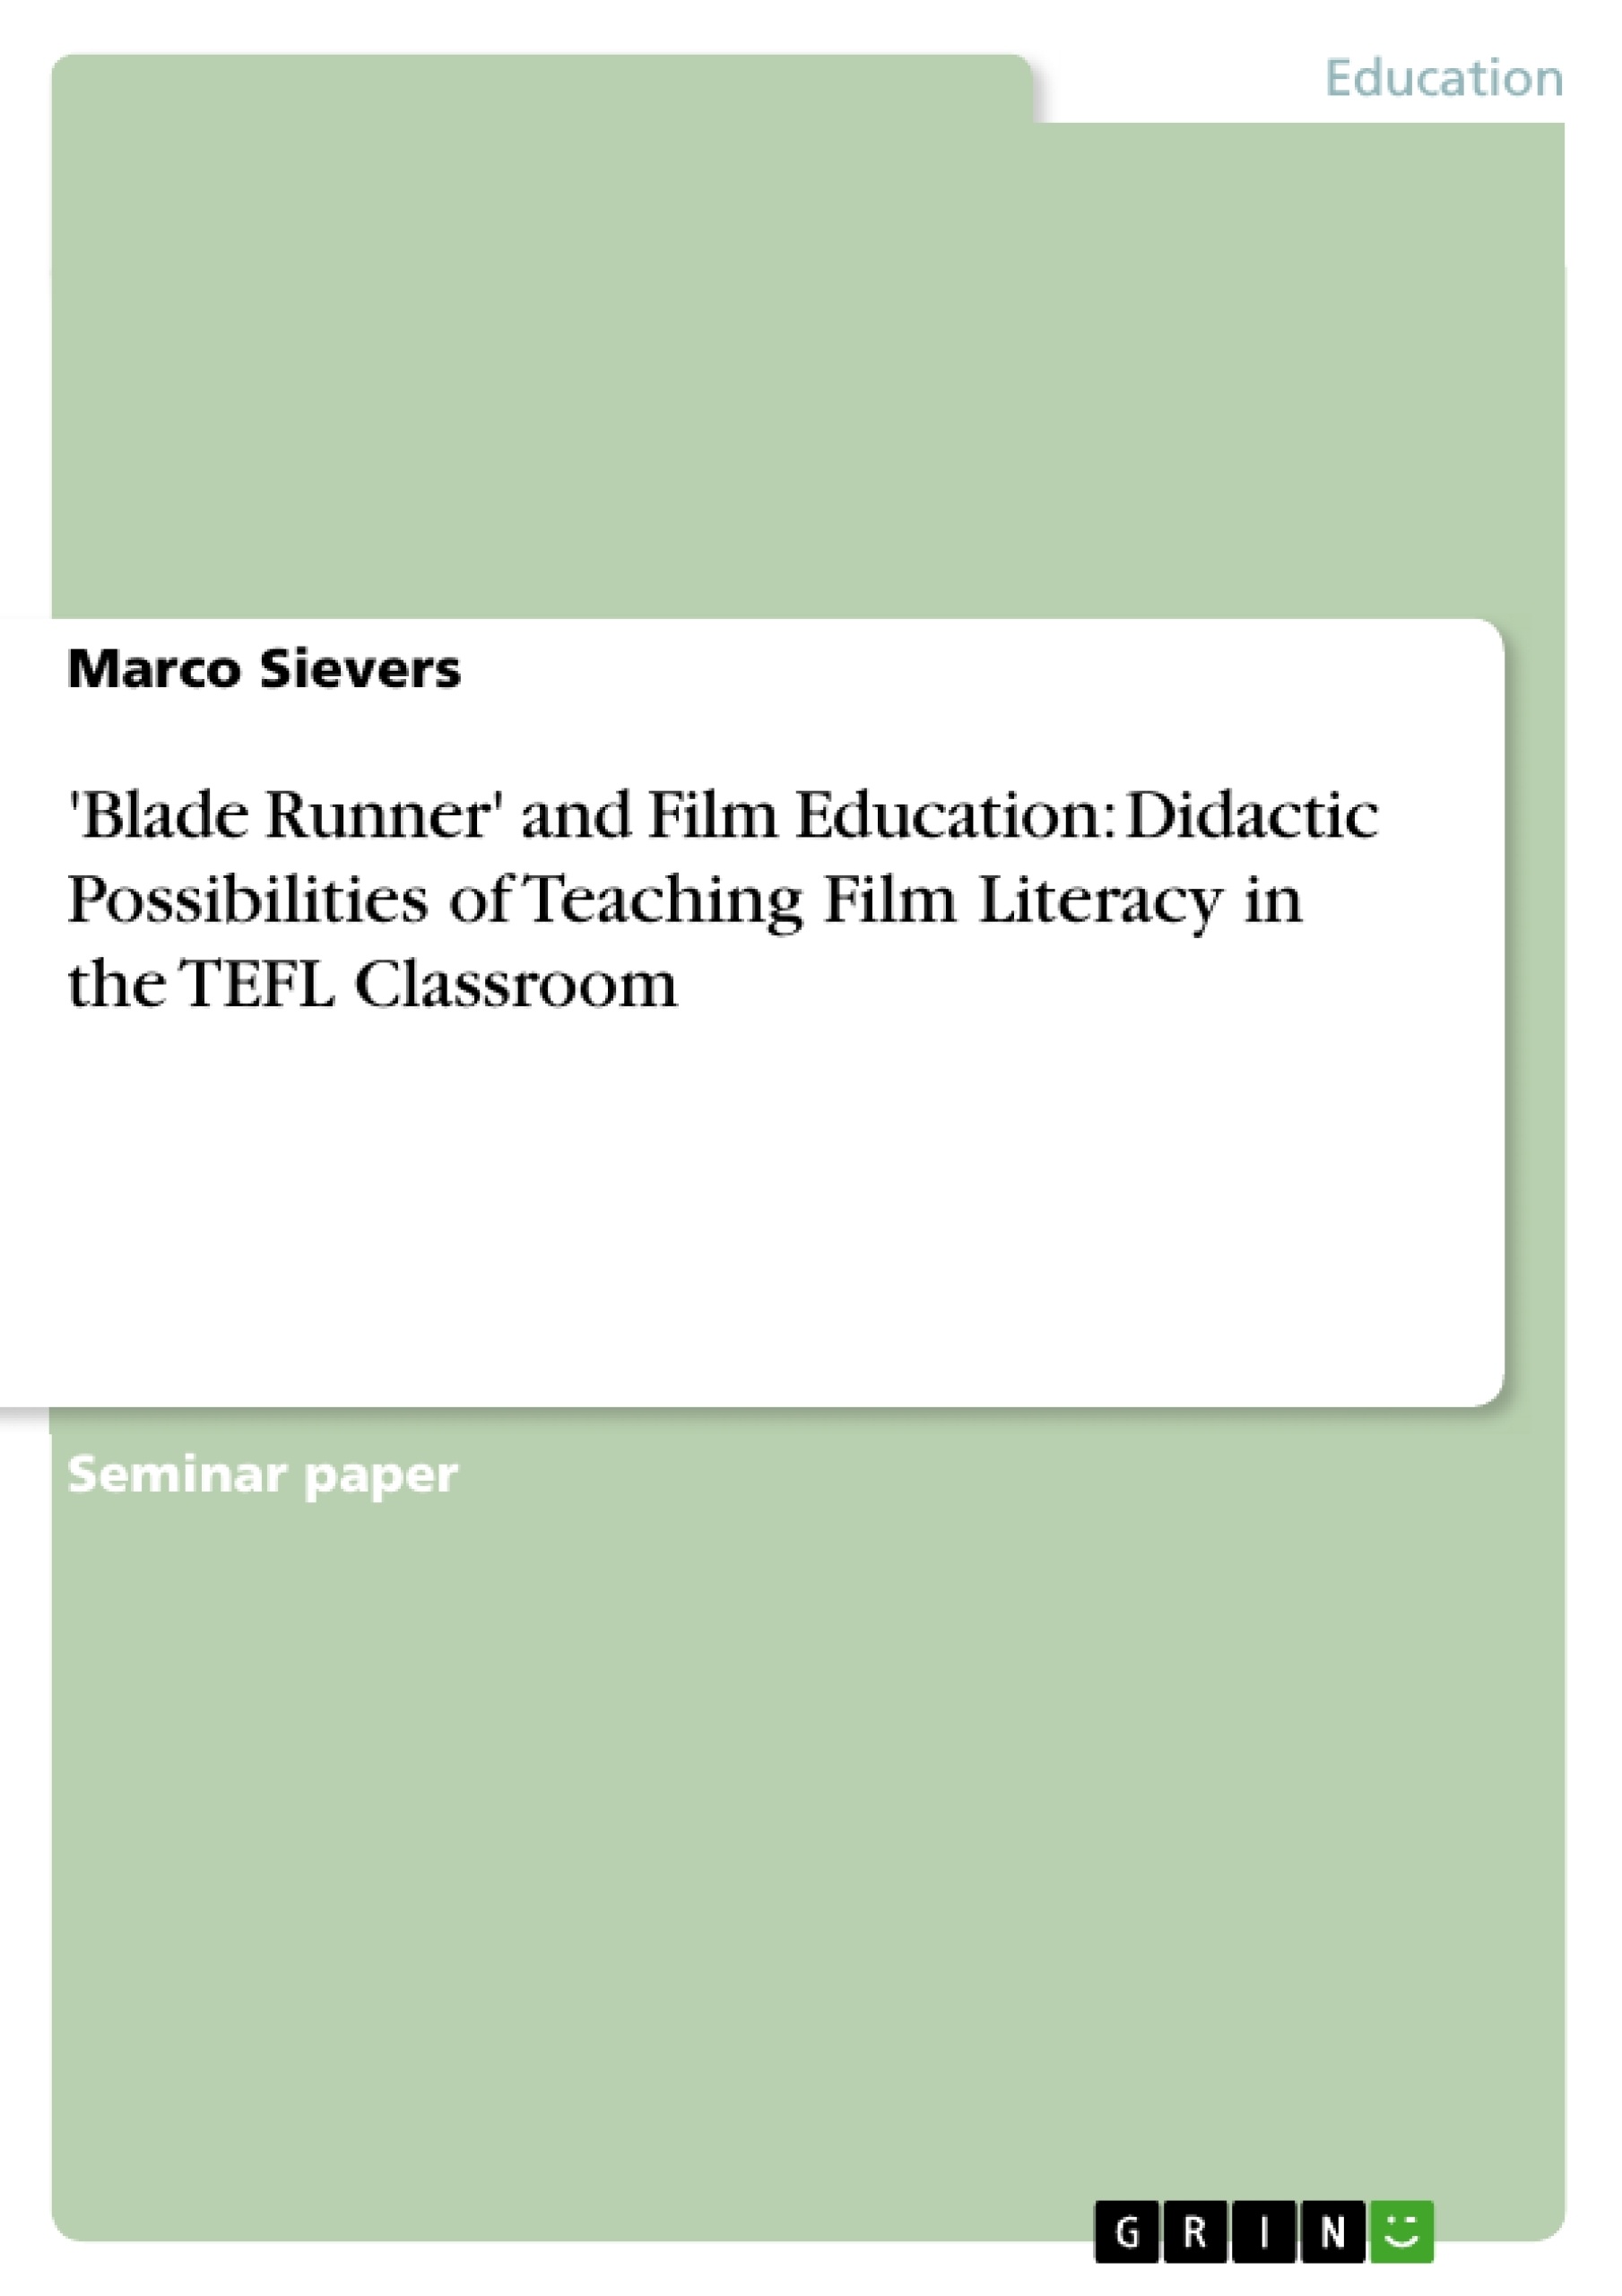 Title: 'Blade Runner' and Film Education: Didactic Possibilities of Teaching Film Literacy in the TEFL Classroom